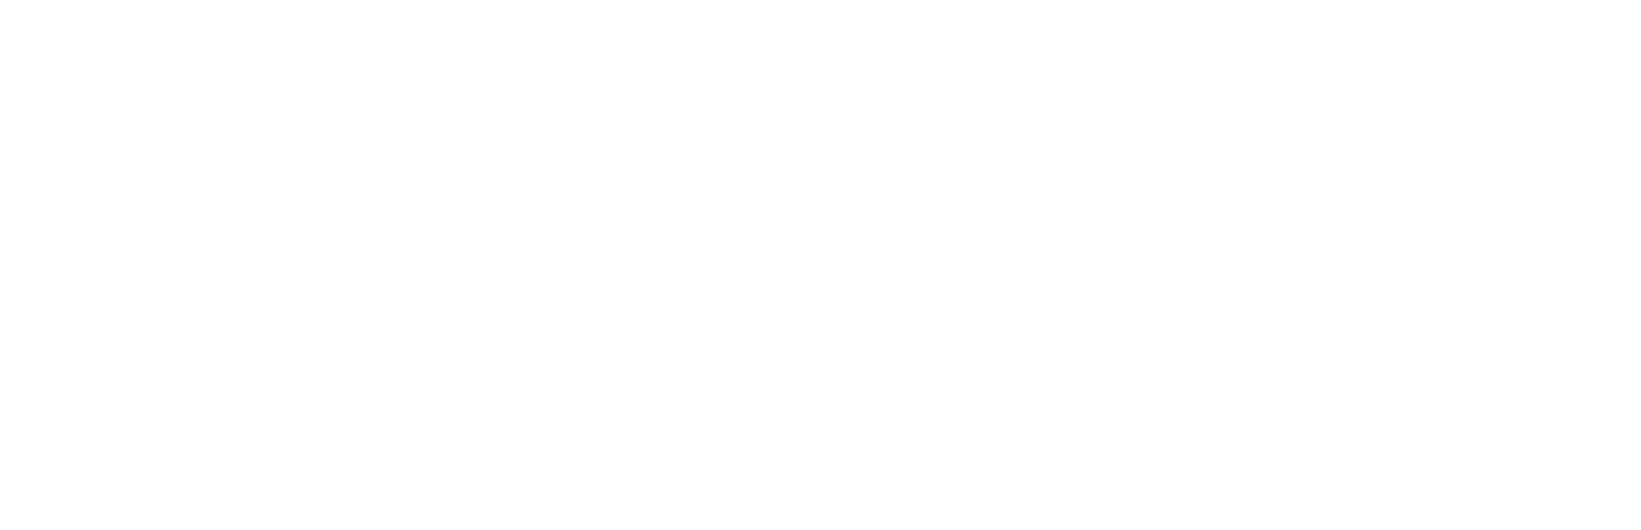 UVMATE - Air, Water & Surface Disinfection